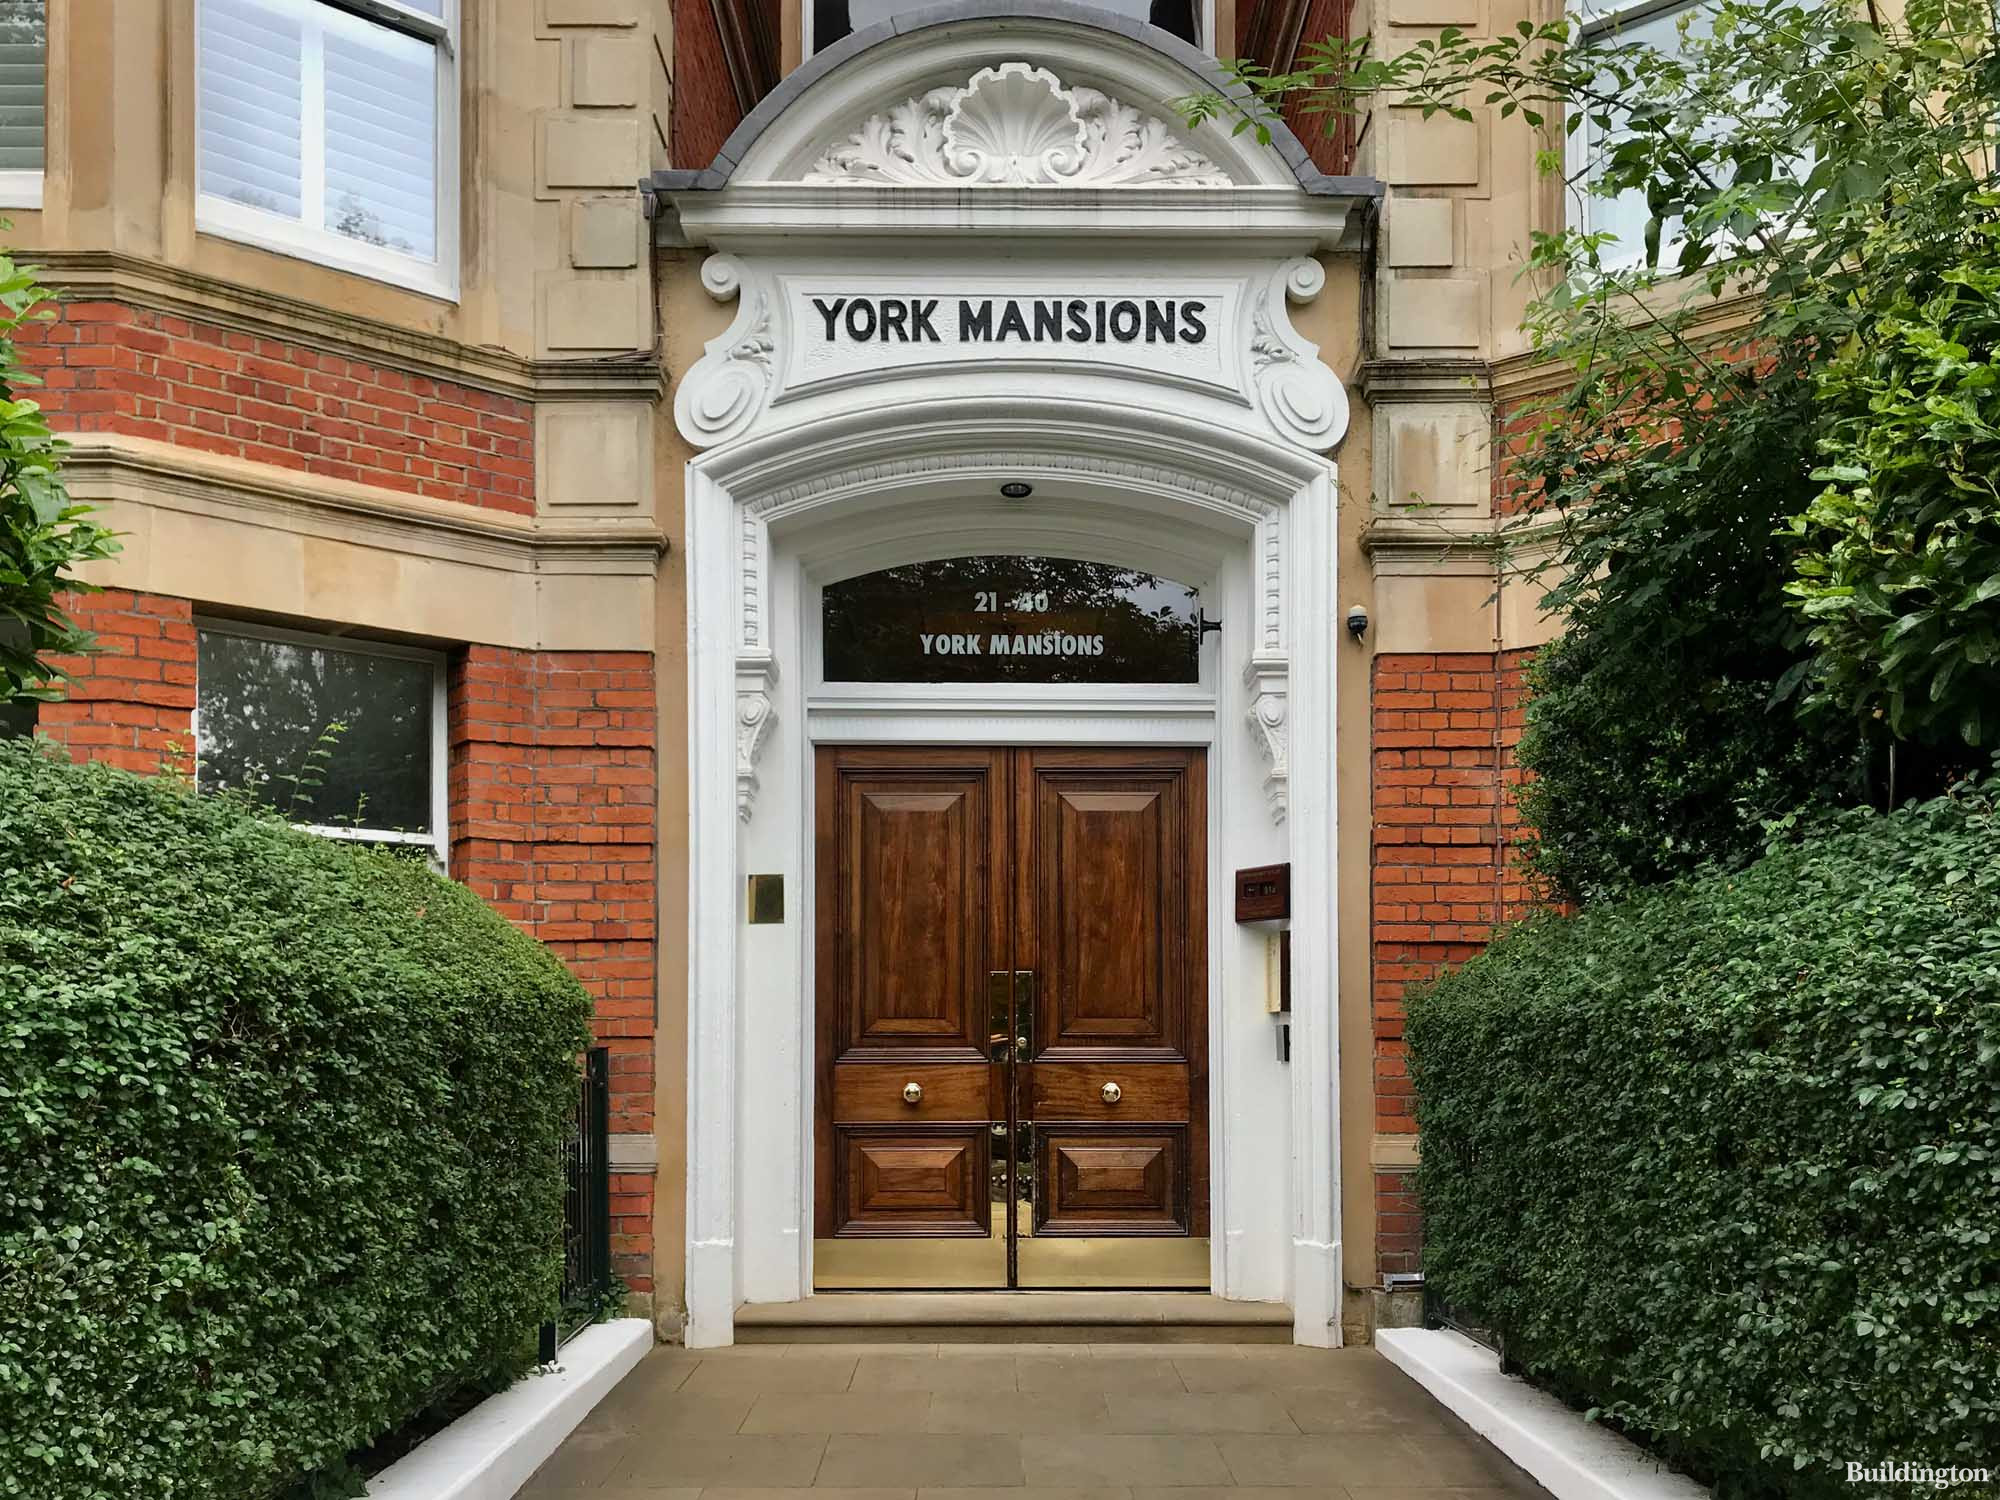 Entrance to York Mansions flats no. 21-40 on Prince of Wales Drive in Battersea, London SW11.